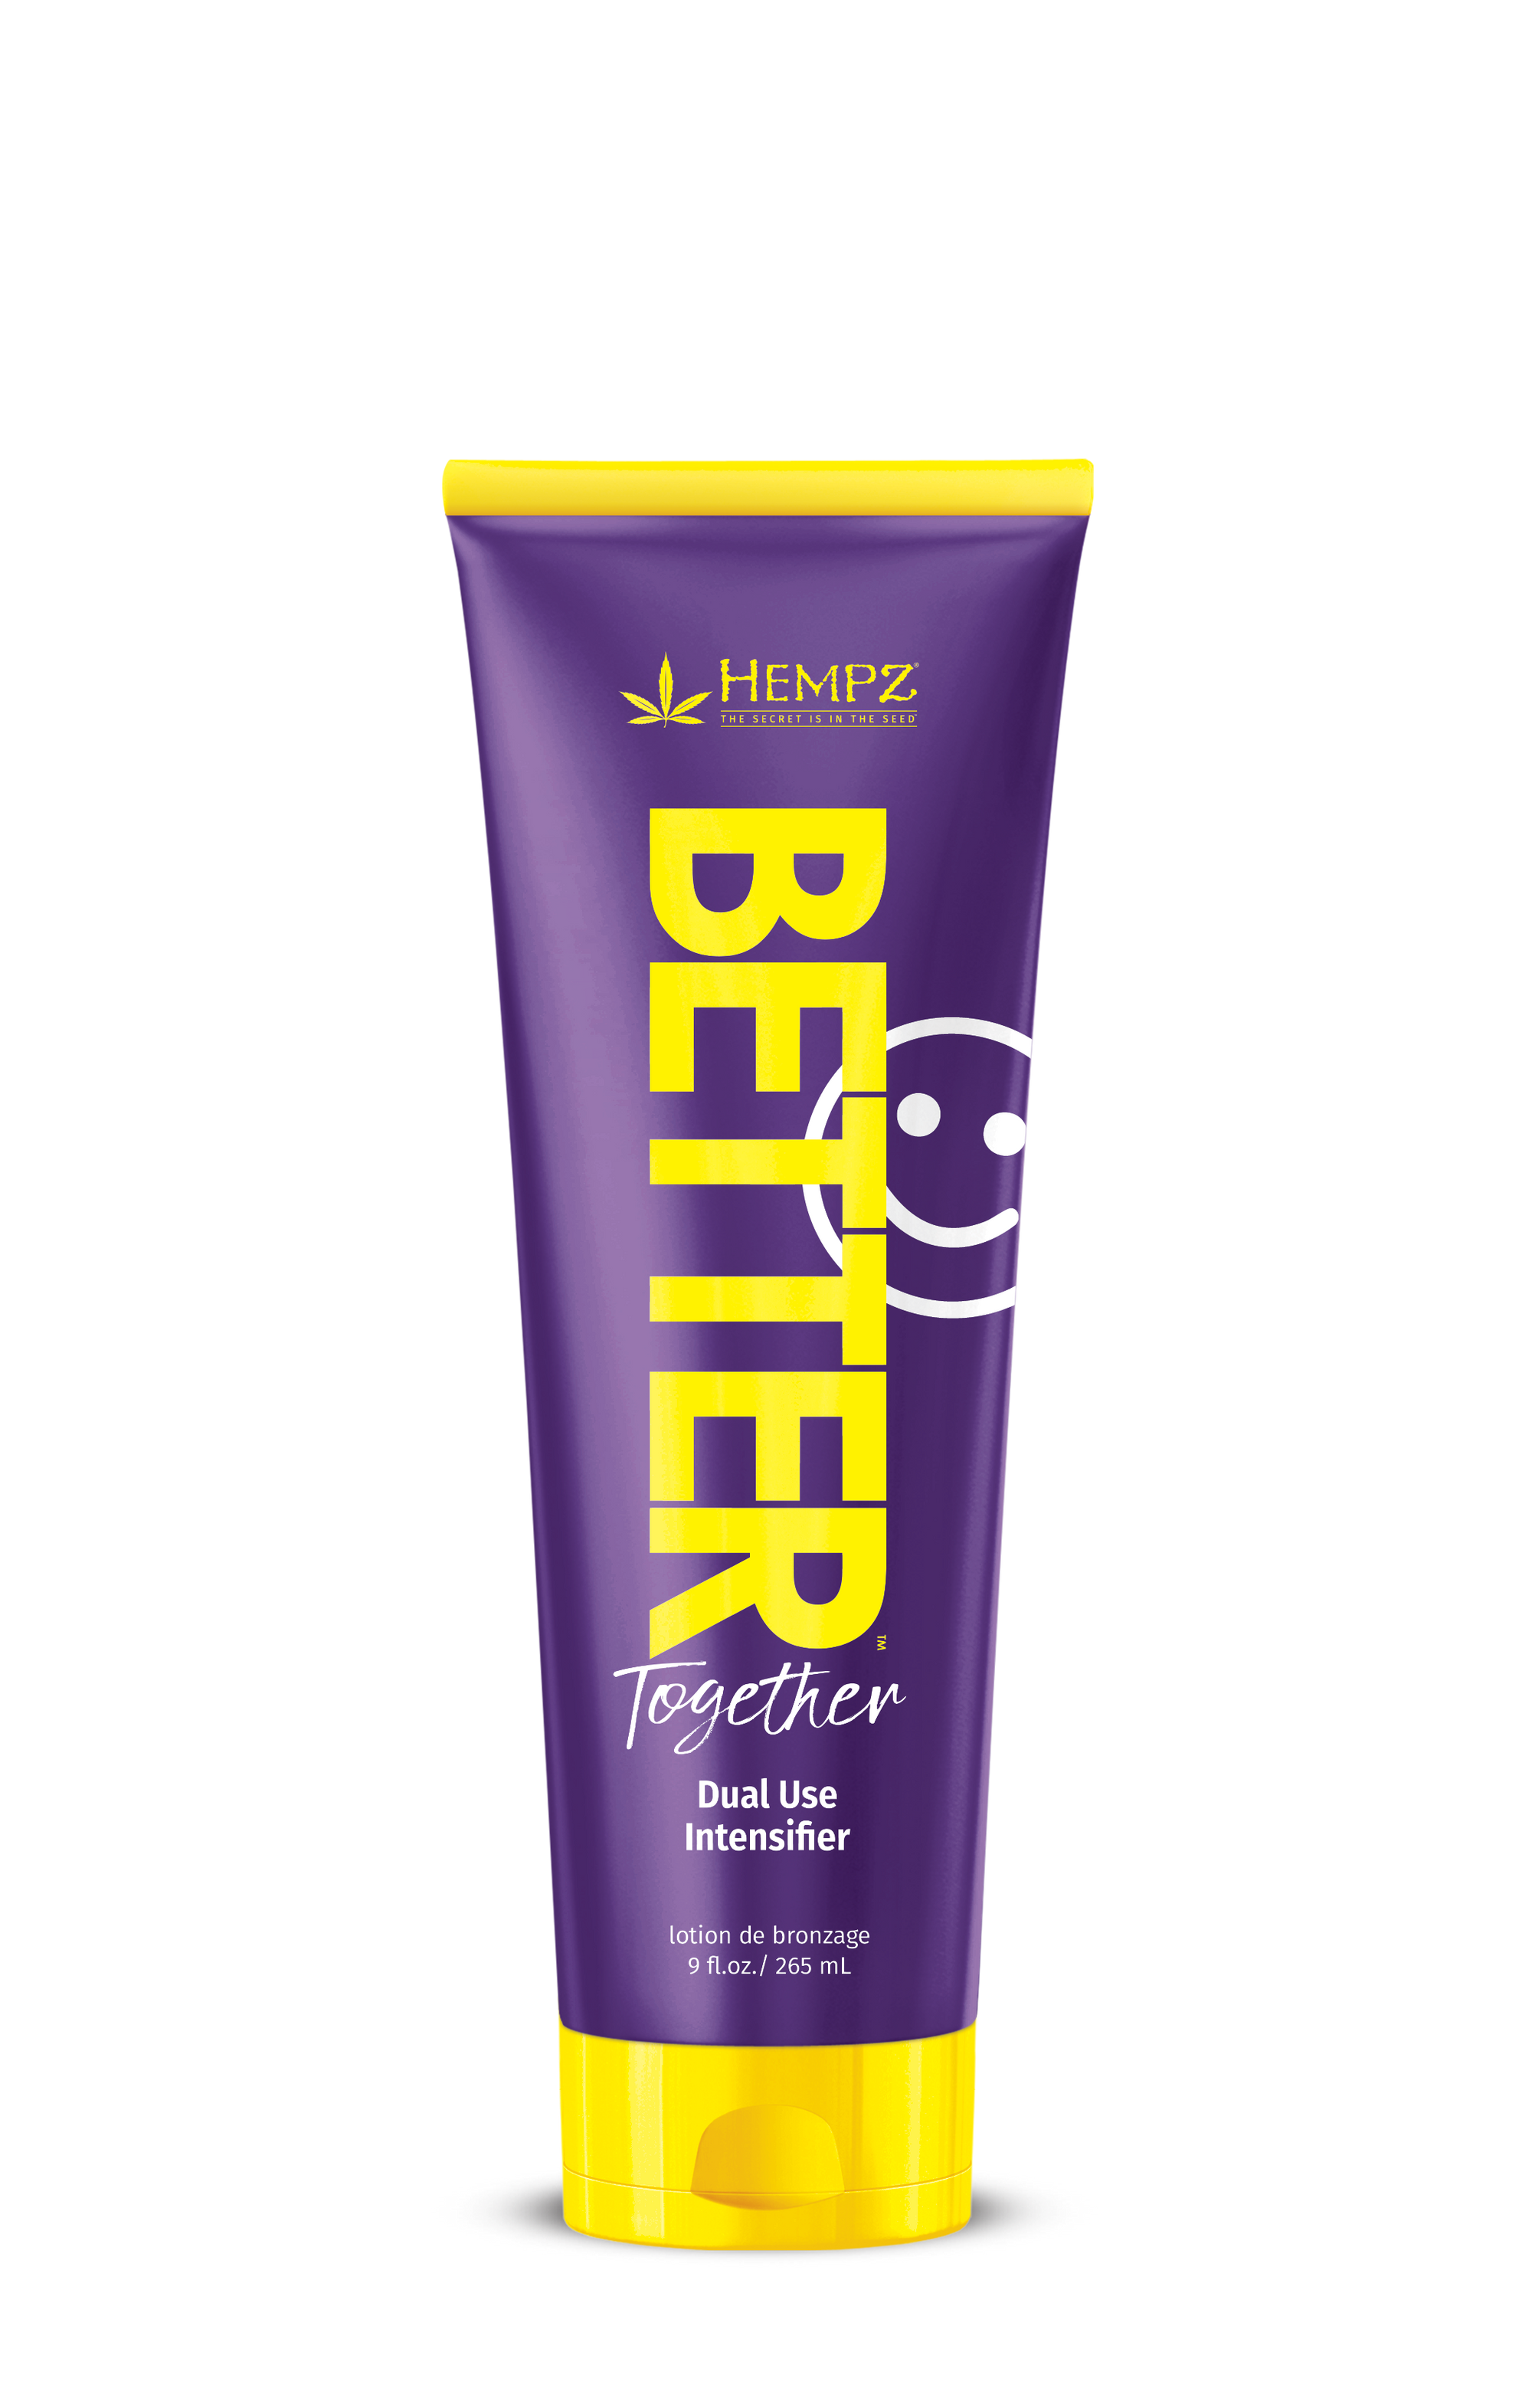 Better Together Dual Use Intensifier